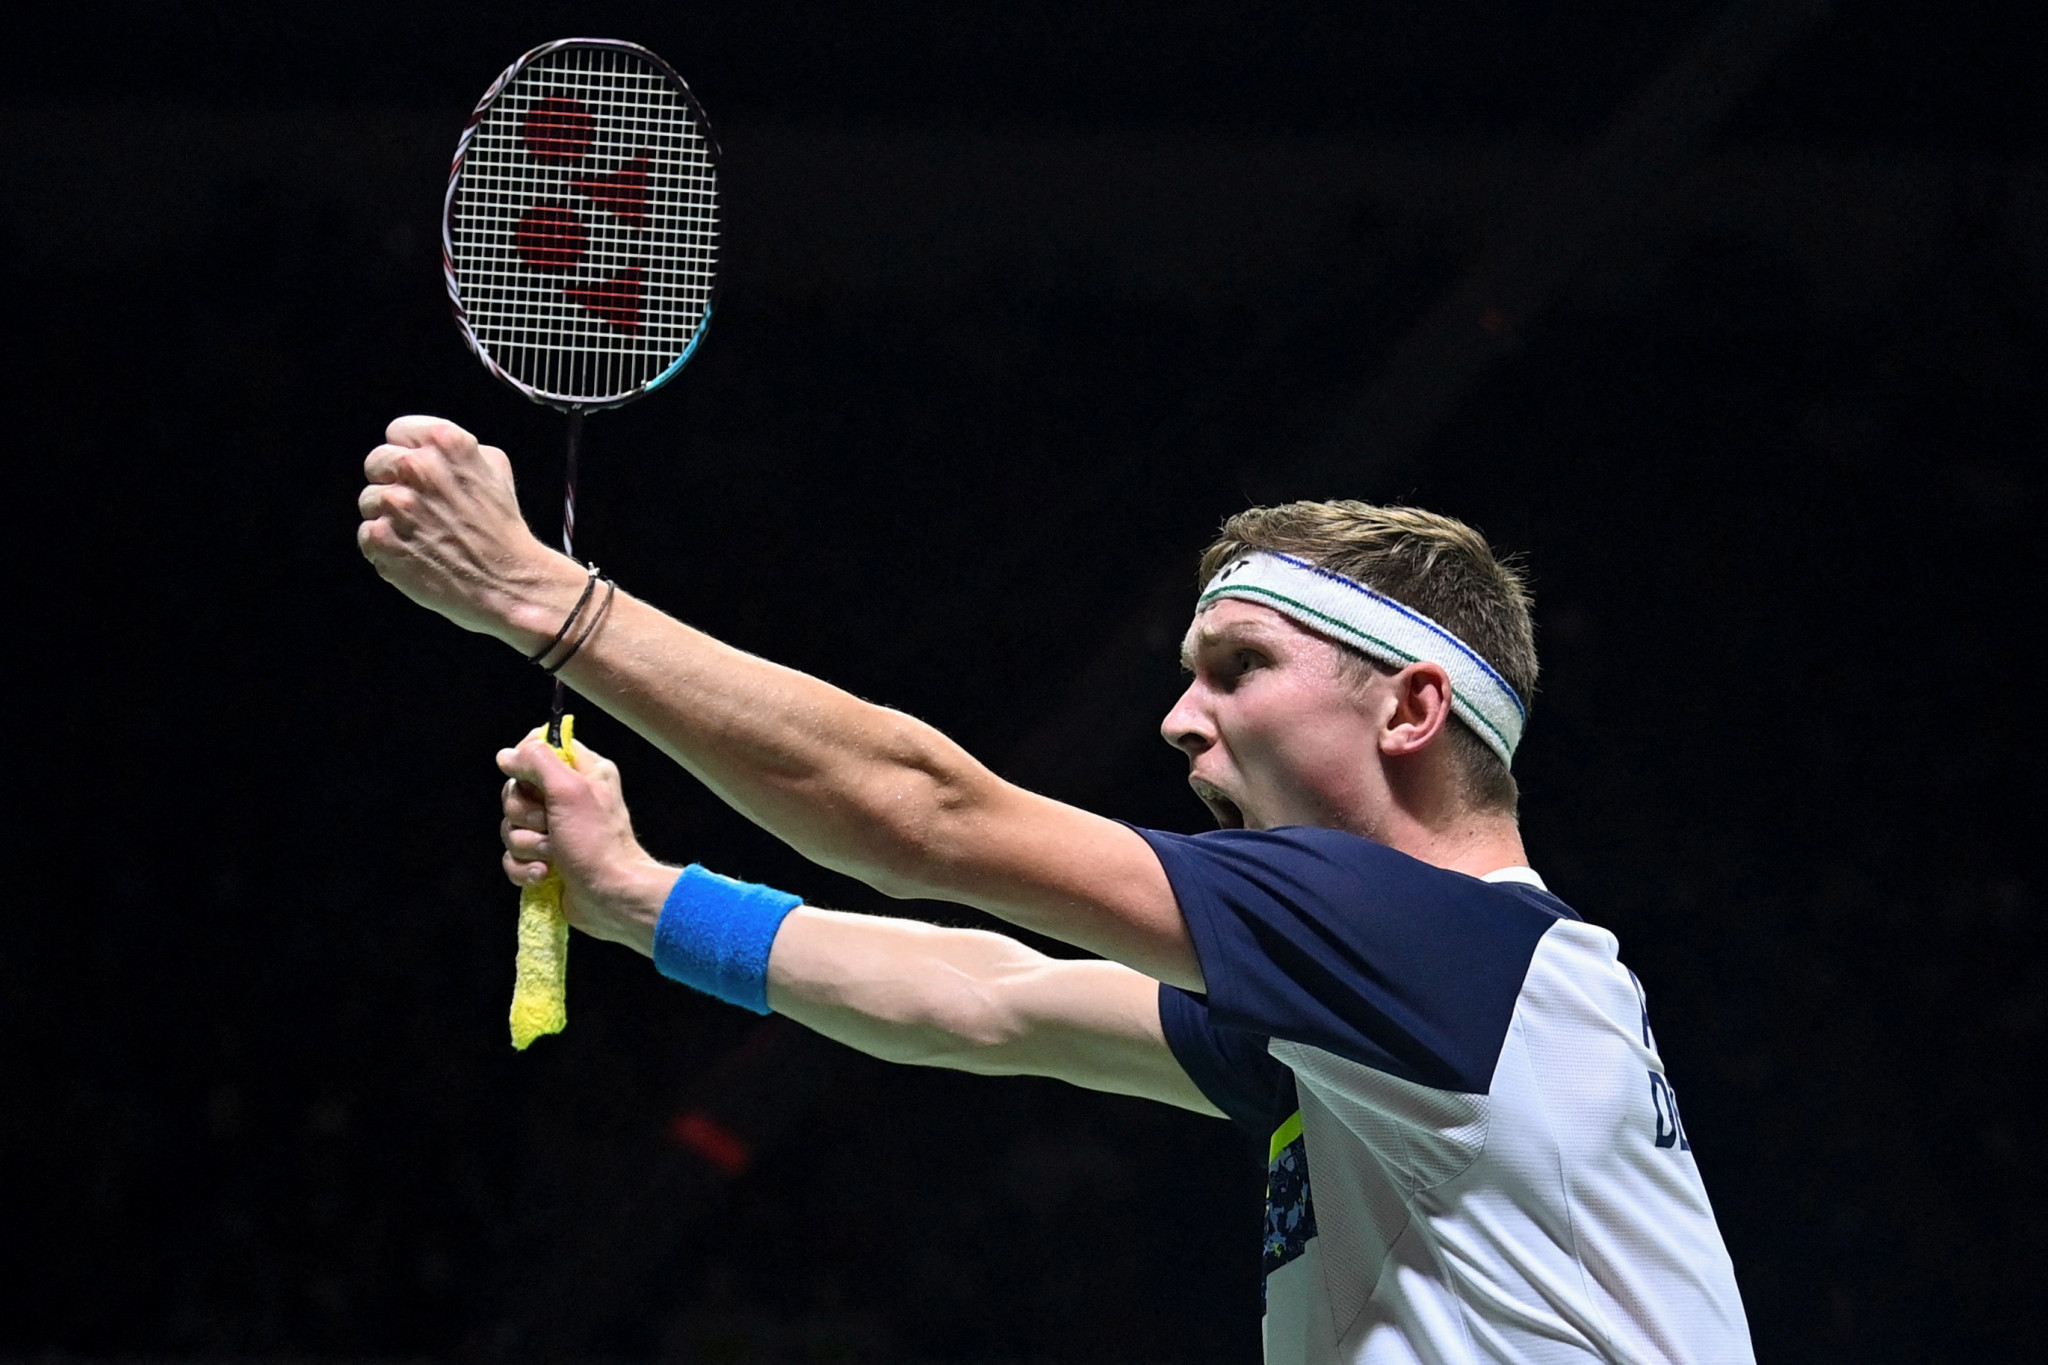 Axelsen powers through first round at Indonesia Open in Jakarta